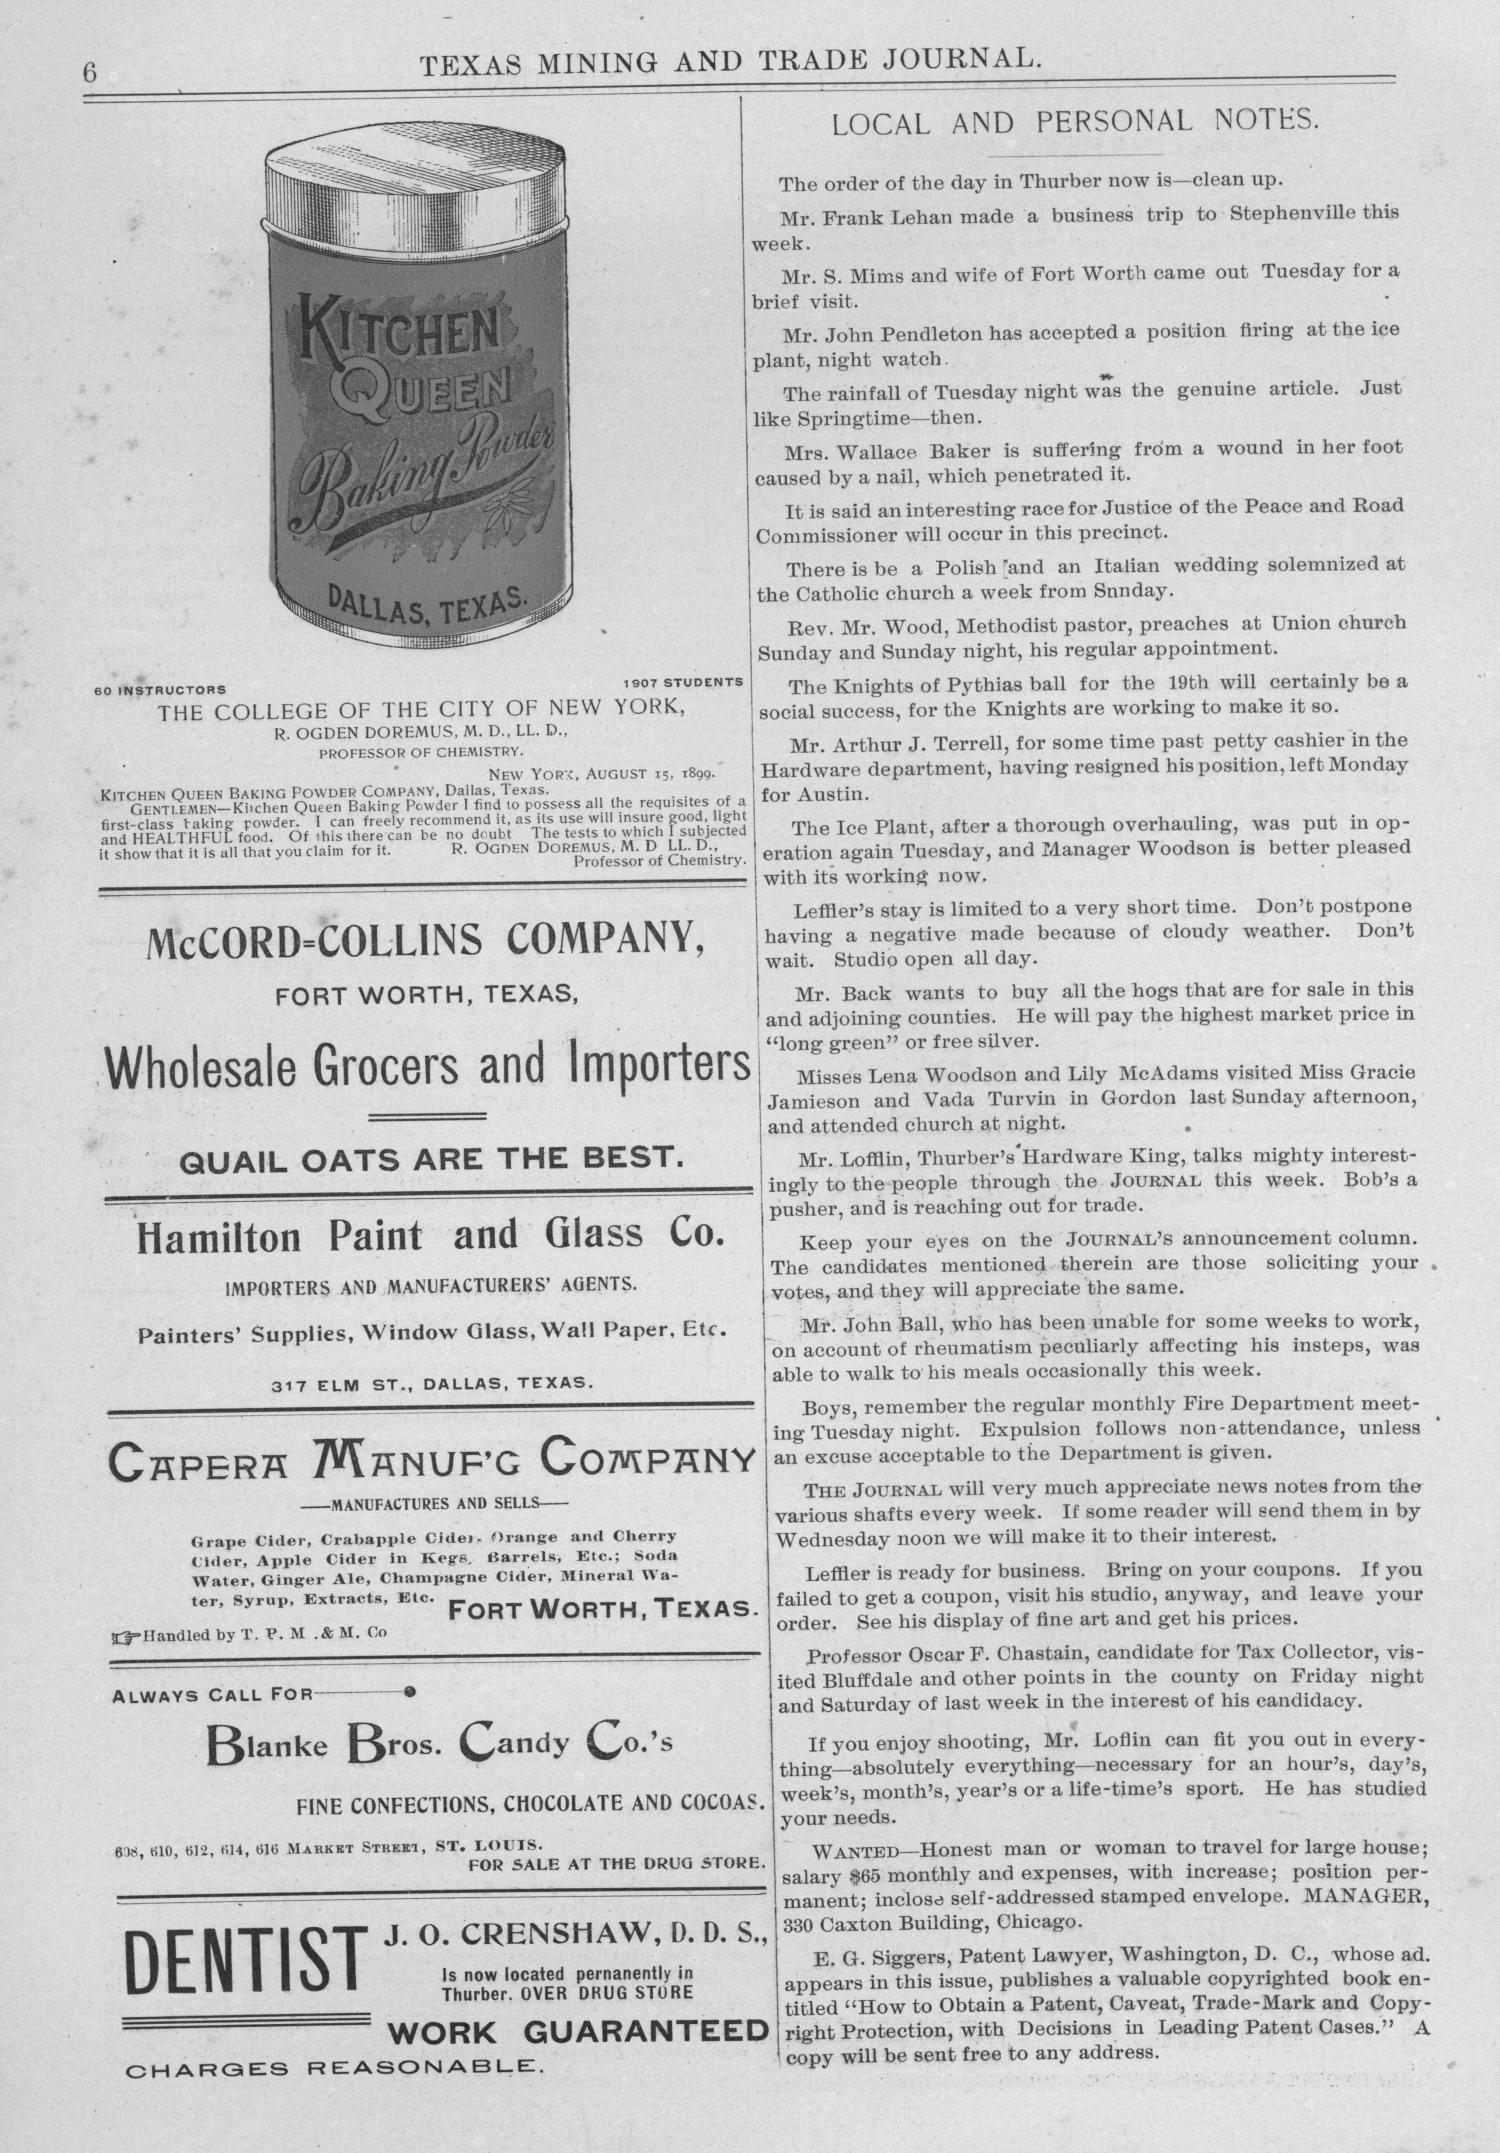 Texas Mining and Trade Journal, Volume 4, Number 30, Saturday, February 10, 1900
                                                
                                                    6
                                                